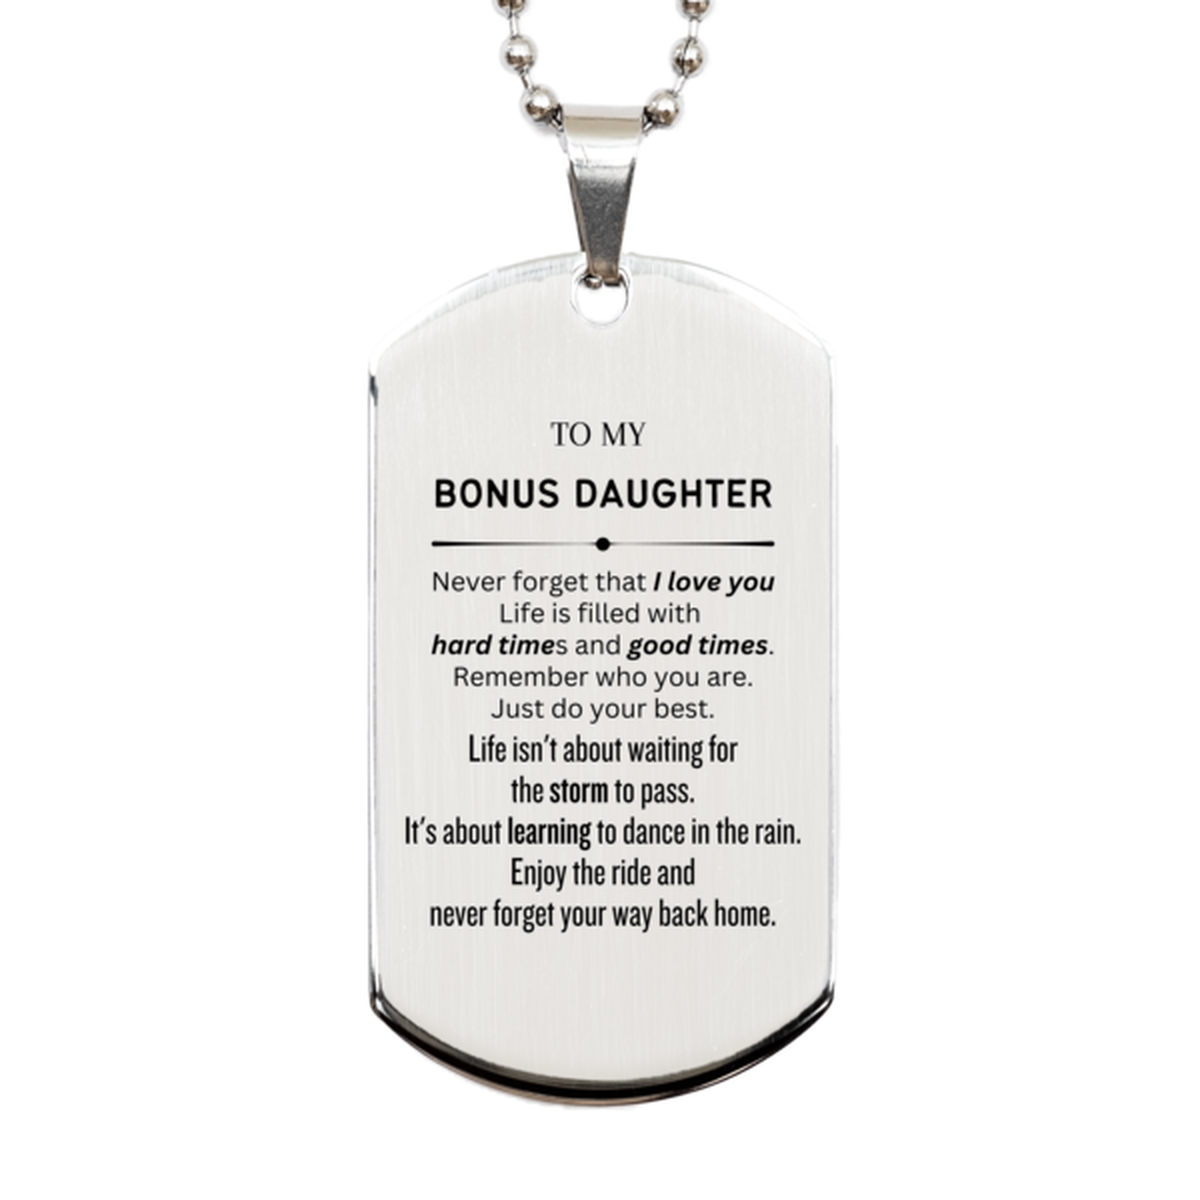 Christmas Bonus Daughter Silver Dog Tag Gifts, To My Bonus Daughter Birthday Thank You Gifts For Bonus Daughter, Graduation Unique Gifts For Bonus Daughter To My Bonus Daughter Never forget that I love you life is filled with hard times and good times. Re